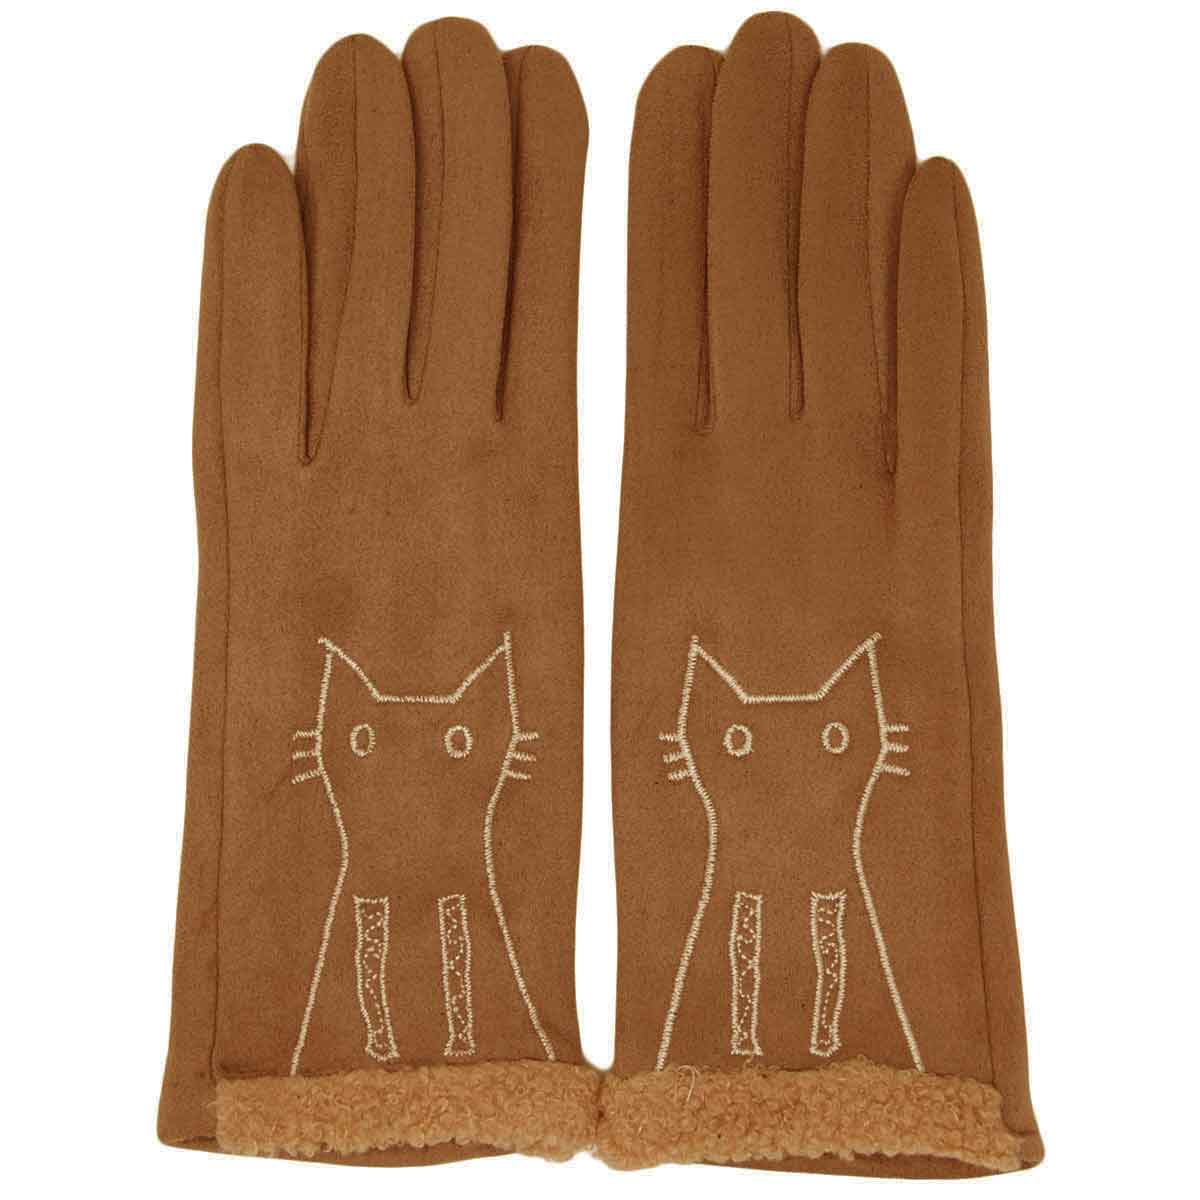 1224 - Camel Cat Silhouette<br>
Touch Screen Smart Gloves